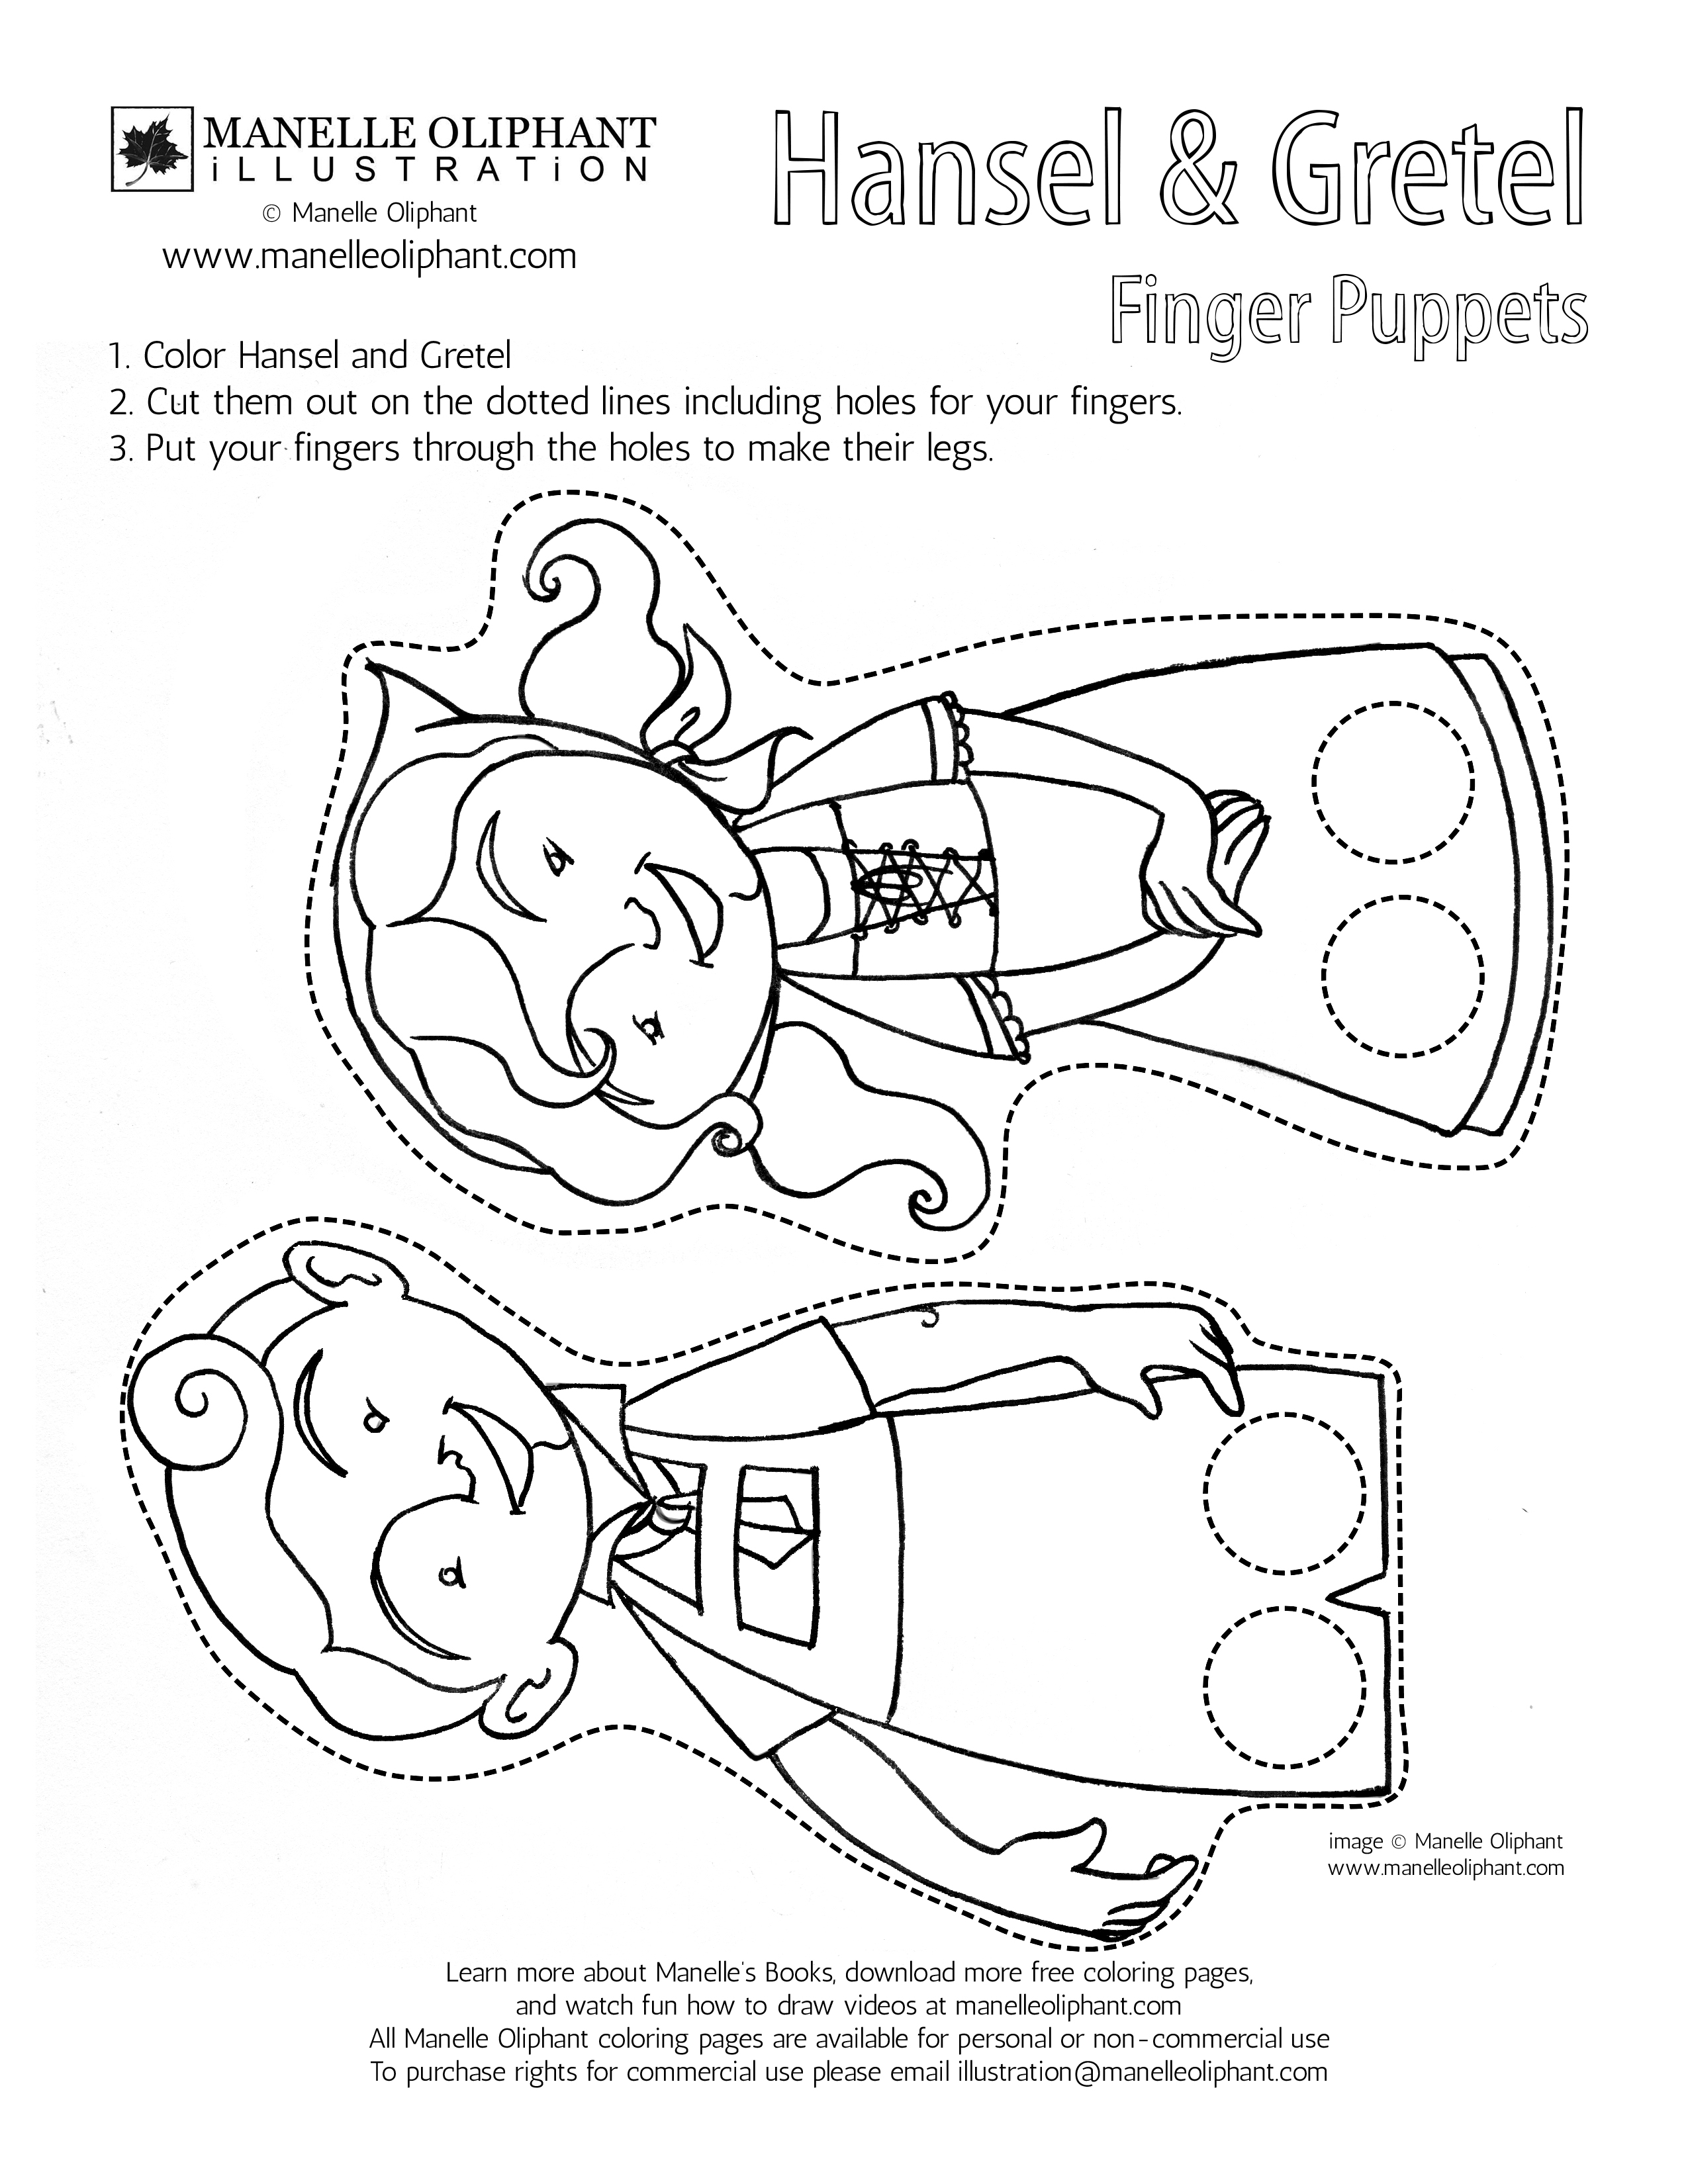 Download Hansel and Gretel puppets (With images) | Finger puppets, Puppets, Fairy tale crafts